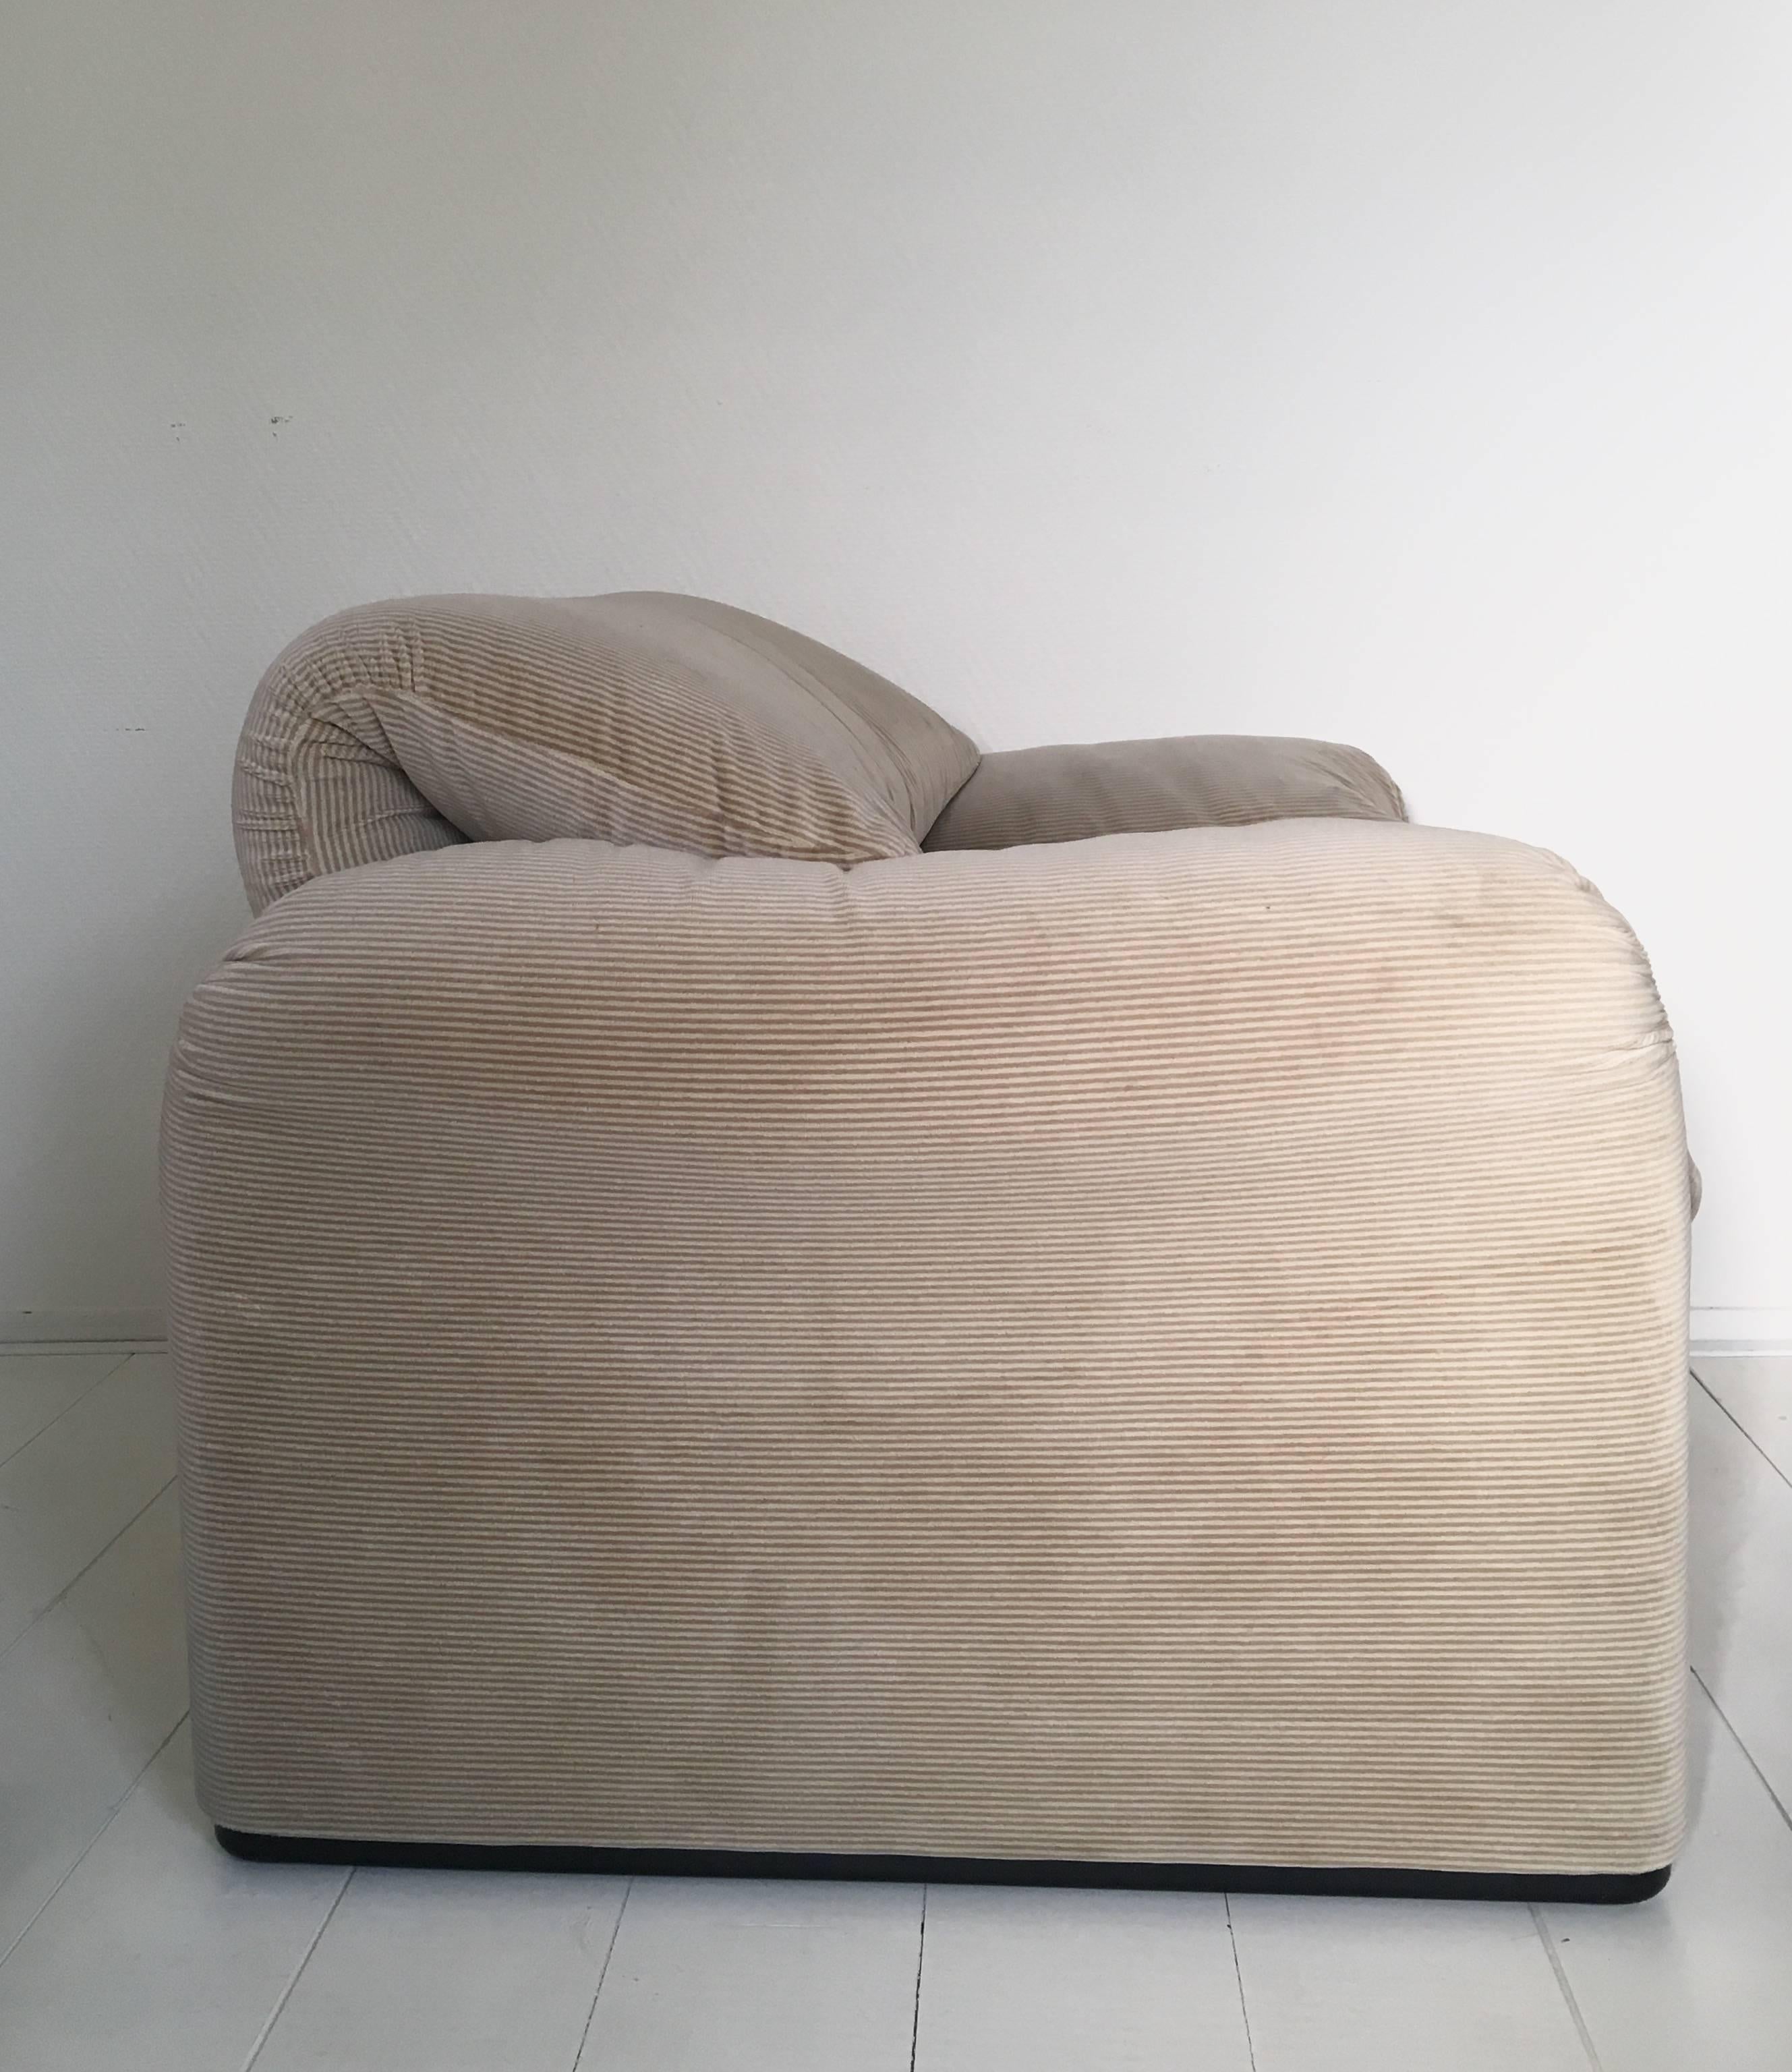 This warm and comfortable armchair, was designed by Vico Magistretti for Cassina in the 1970s. It features a bi-color fabric with subtle stripe pattern in beige and sand. How you will see the exact coloration of the chair, depends on how the light